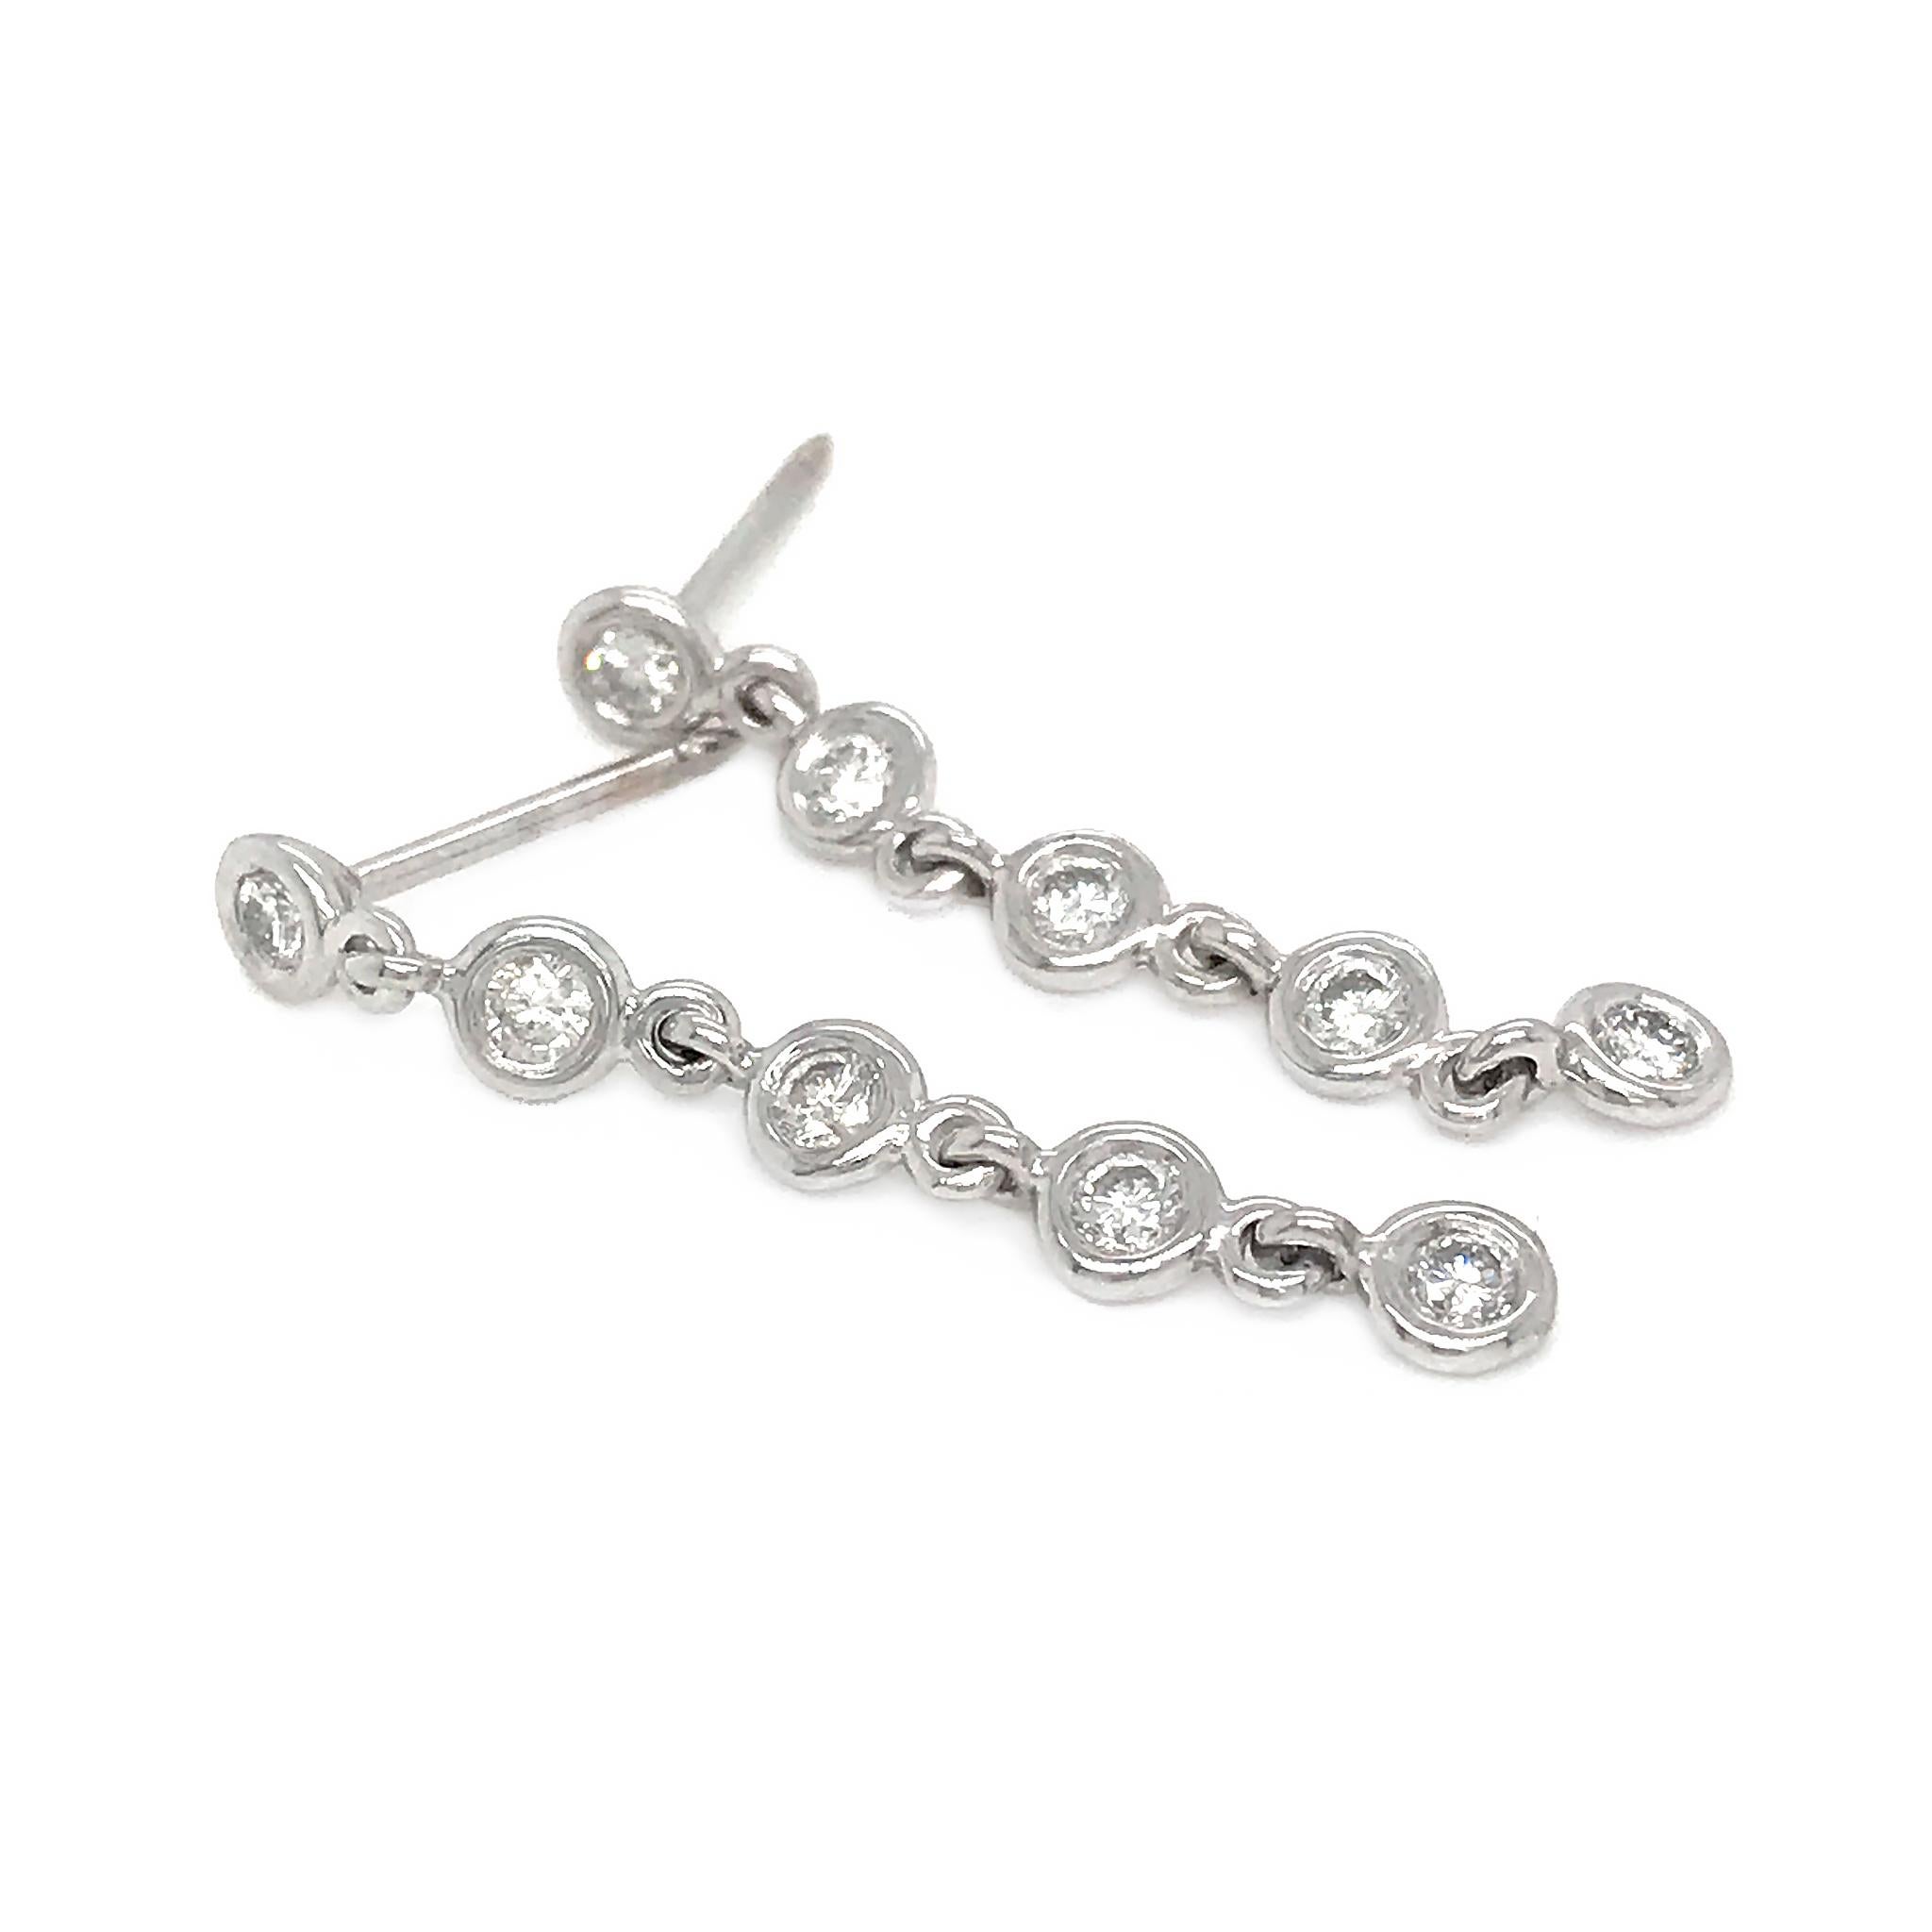 14k White Gold
Diamond: 0.48 ct twd
Total Weight: 1.6 grams
Earrings Length: 1.10 inches